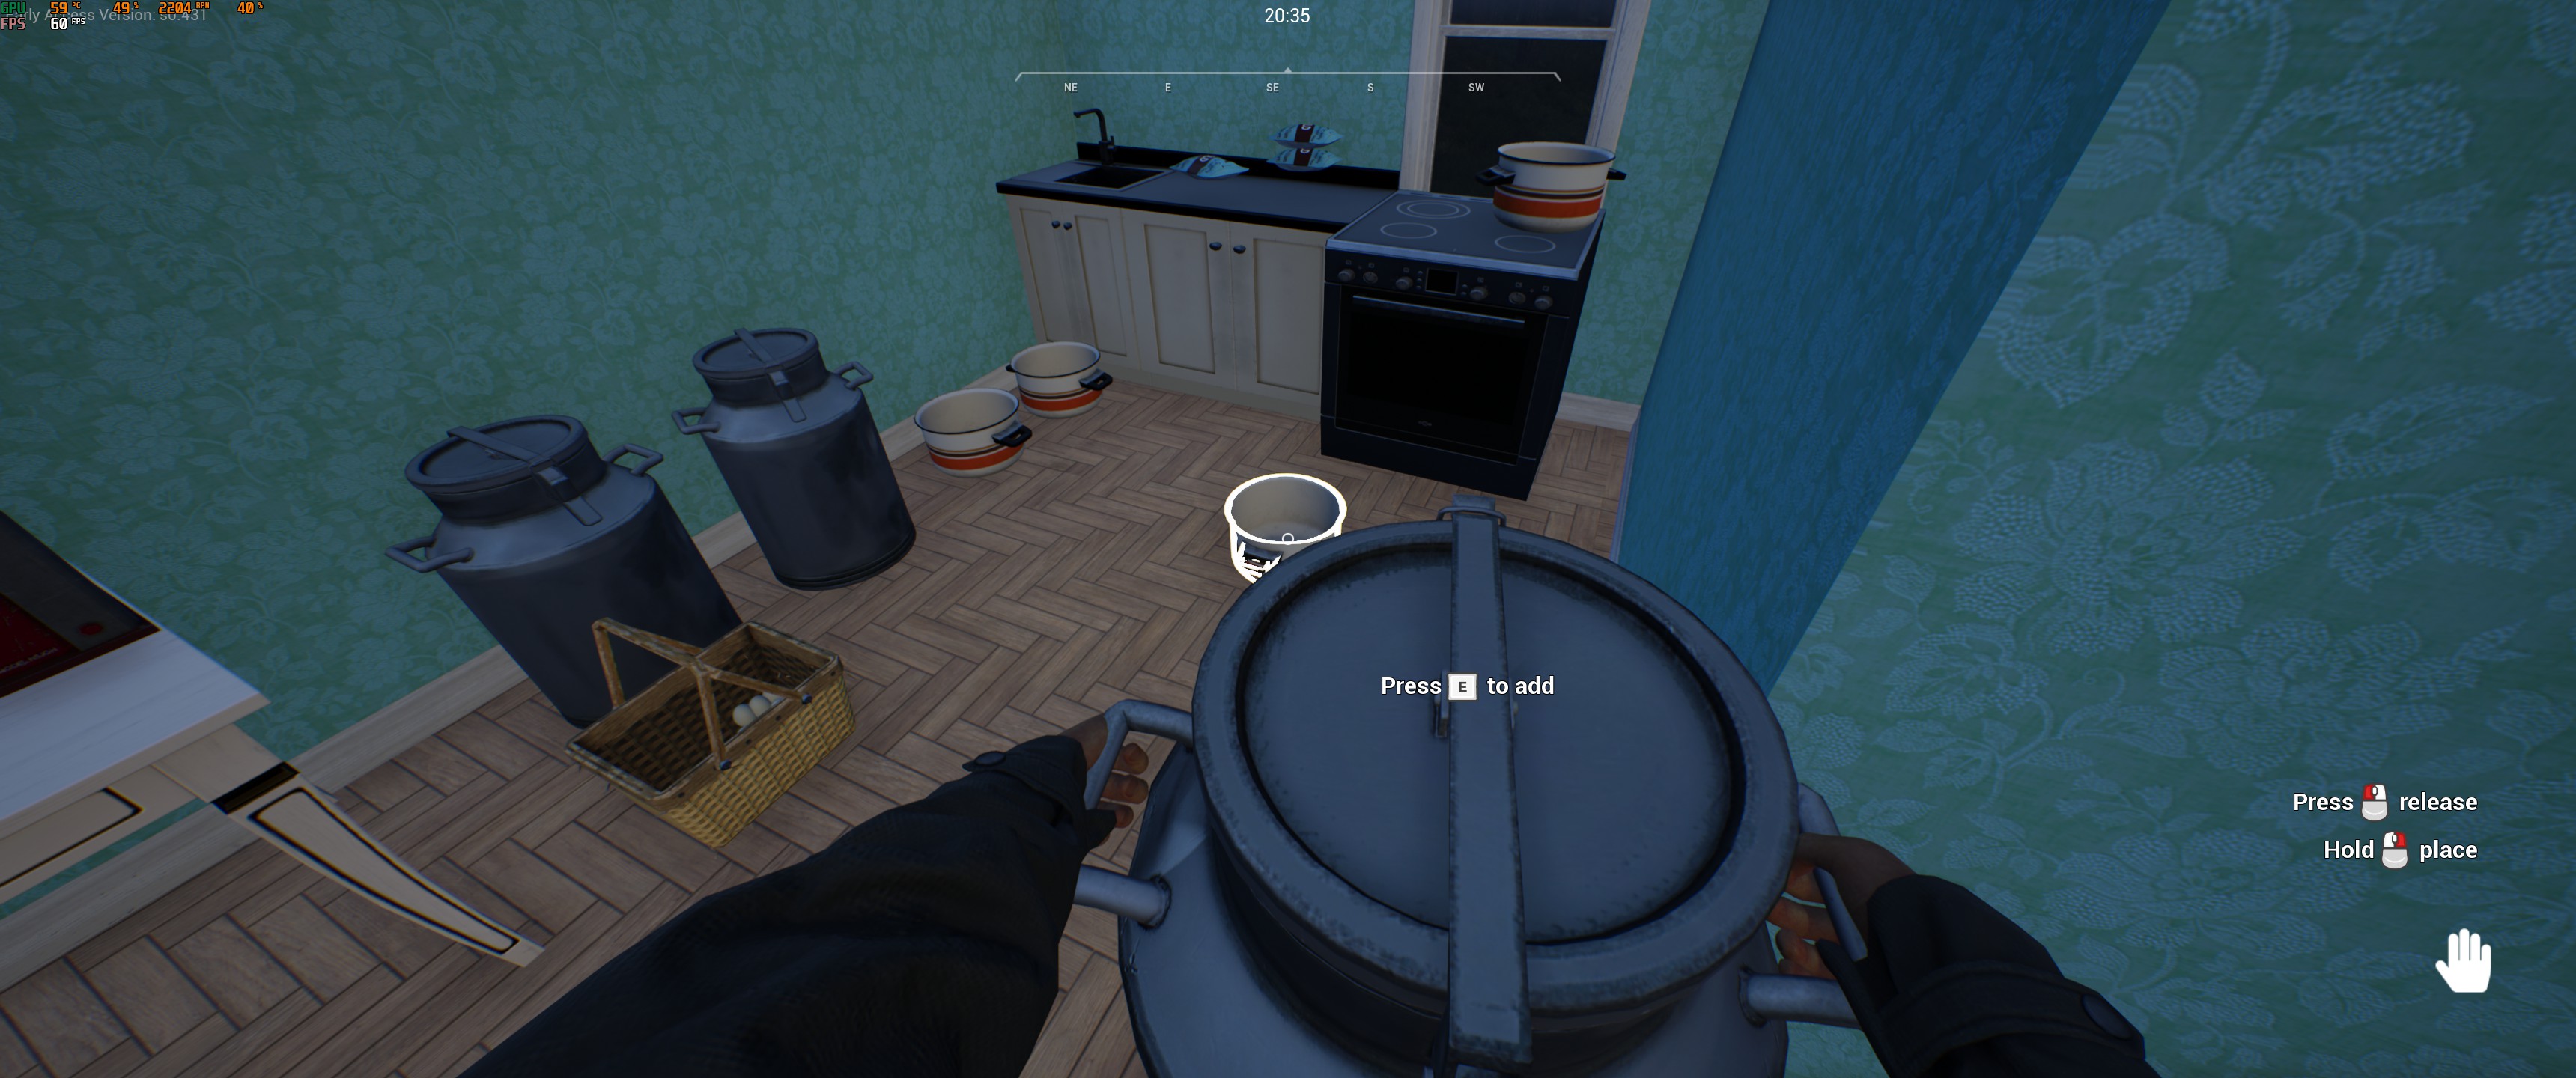 Ranch Simulator Cooking Tips for Beginners Guide